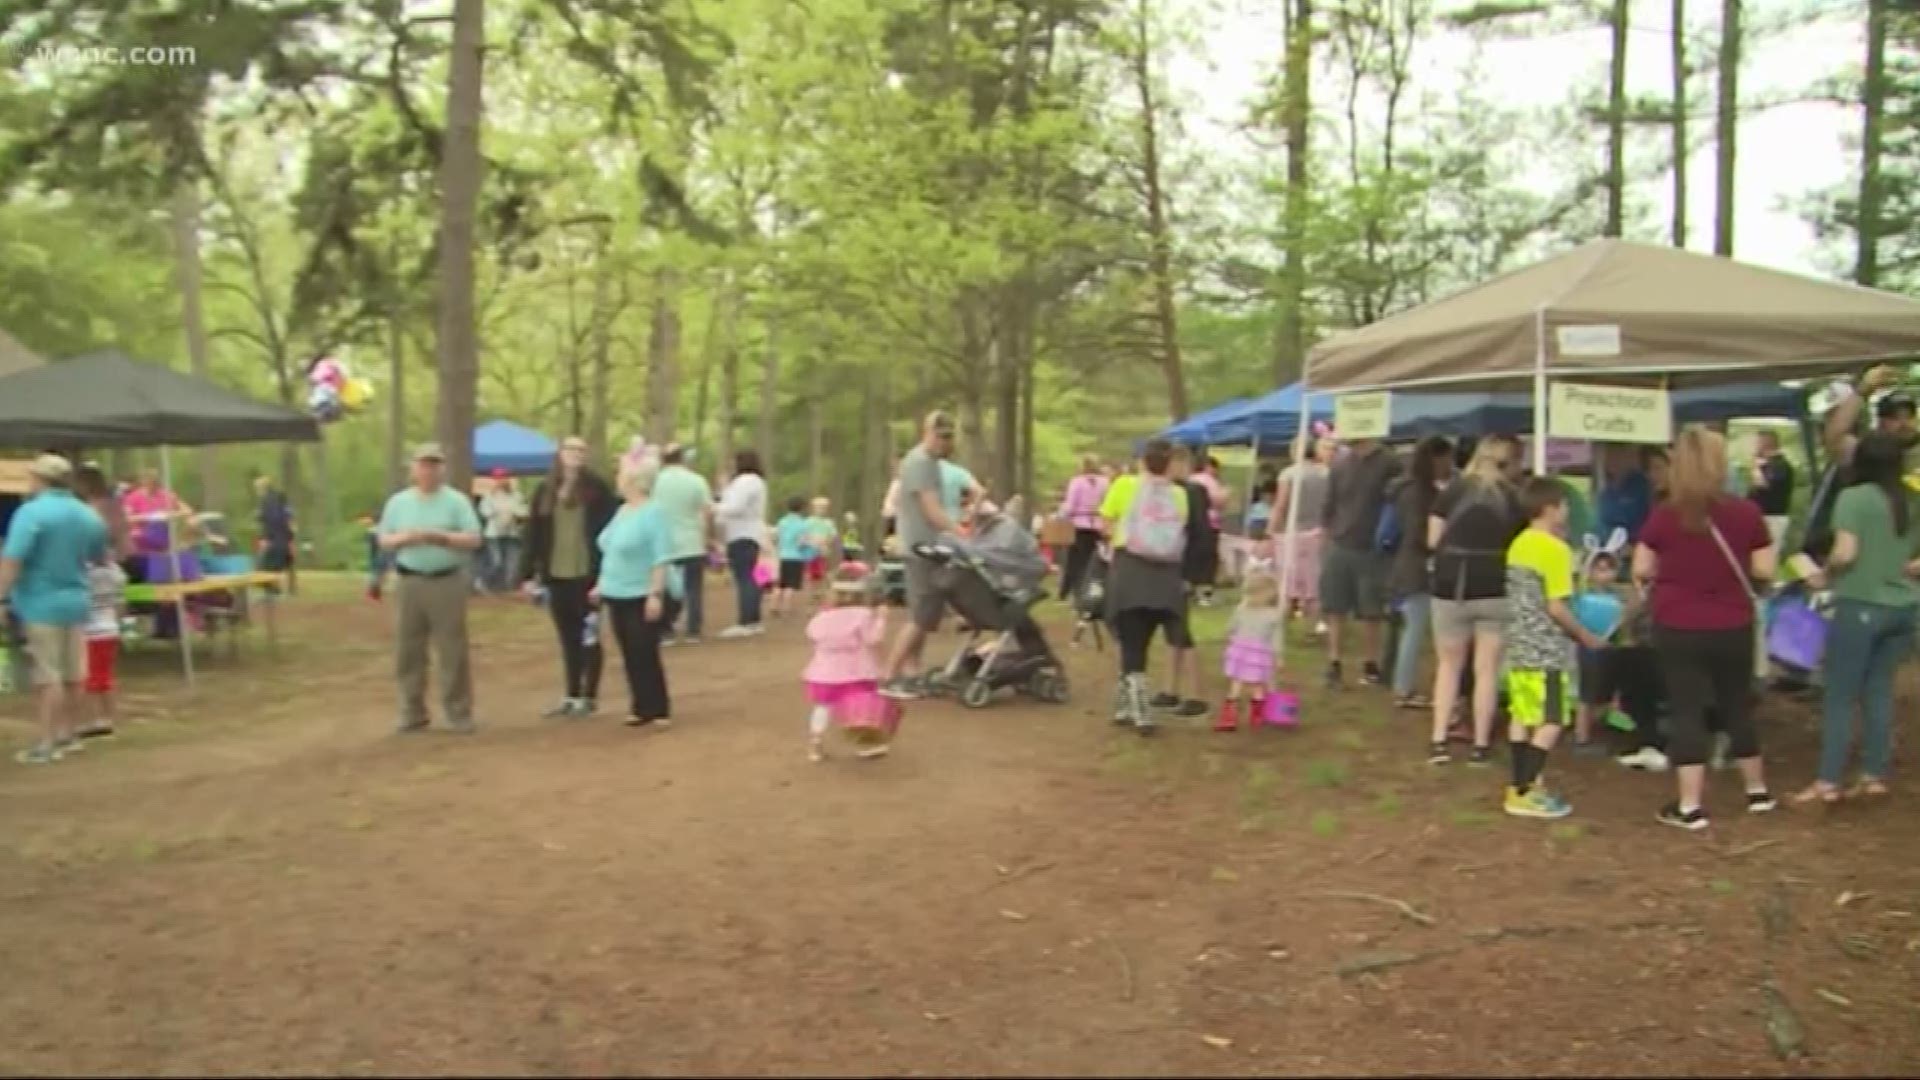 Families found more than 7,000 Easter eggs during the Mint Hill egg hunt.